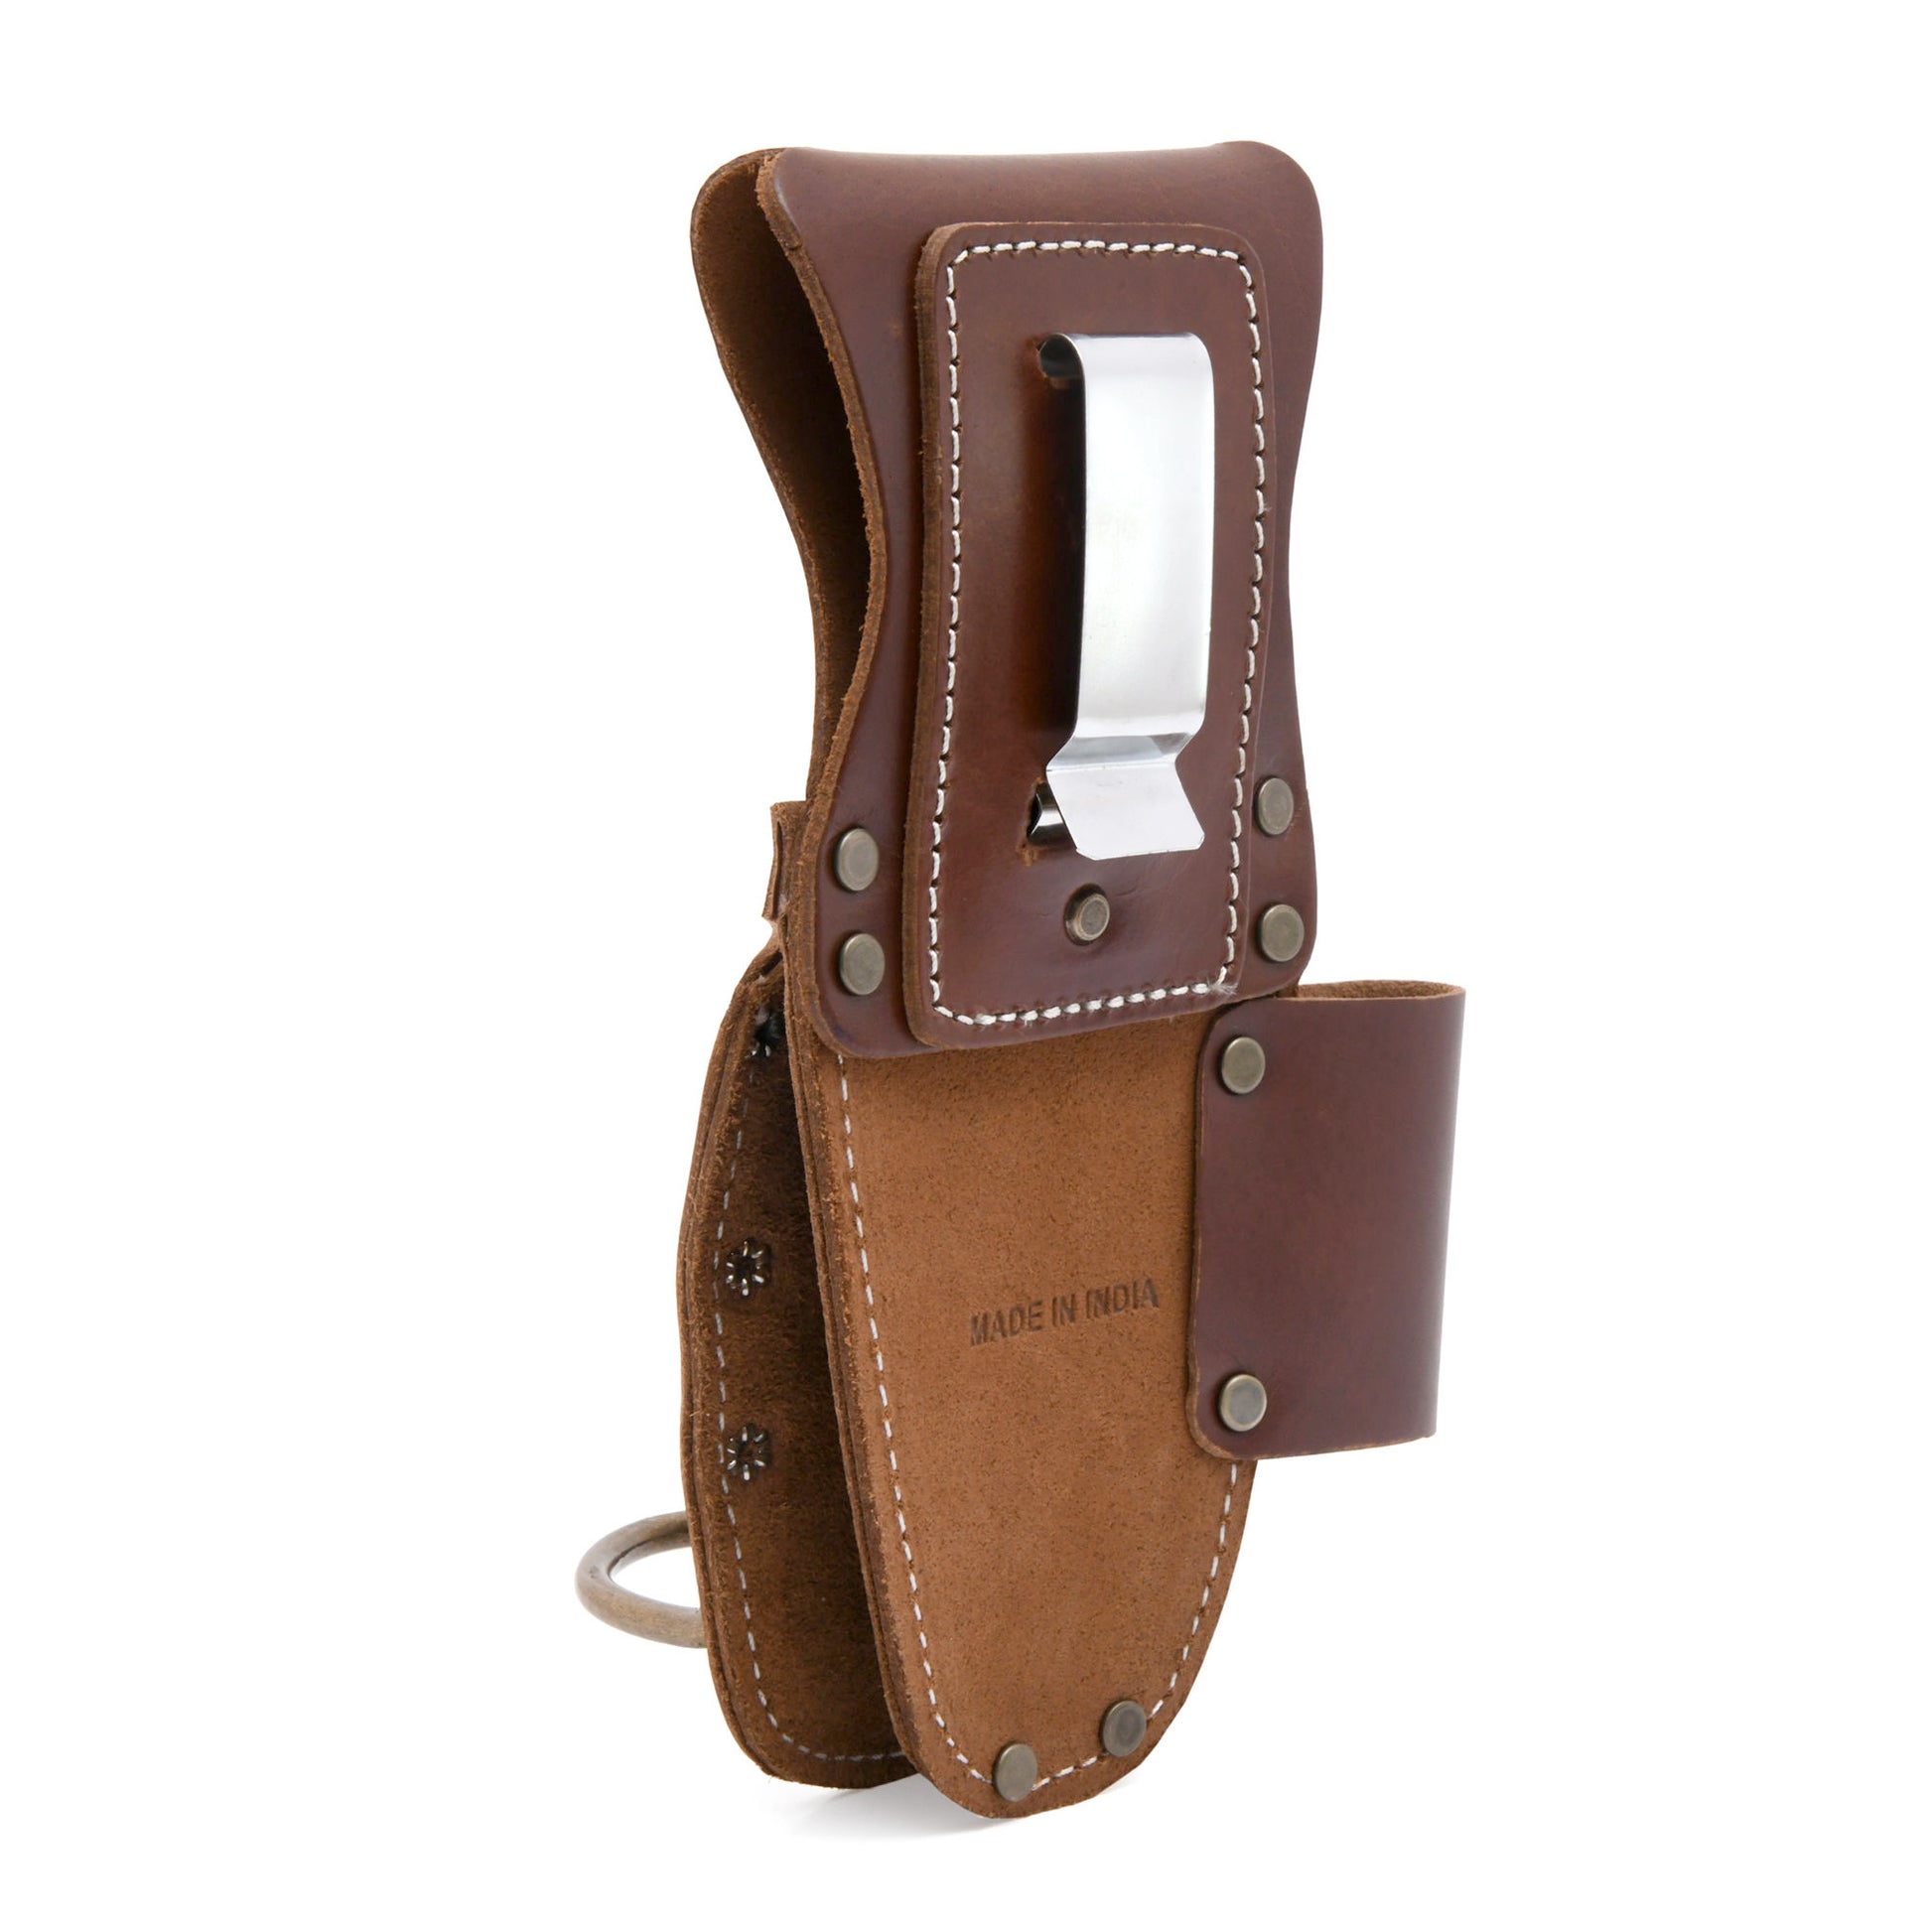 Style n Craft's 98016 - 5 Pocket Pliers, Flashlight & Hammer Holder in Dark Tan Top Grain Leather - Back View Showing the  Metal Clip-On Attachment & Tunnel Loop Attachment for a Belt of Up to 3-Inch Width